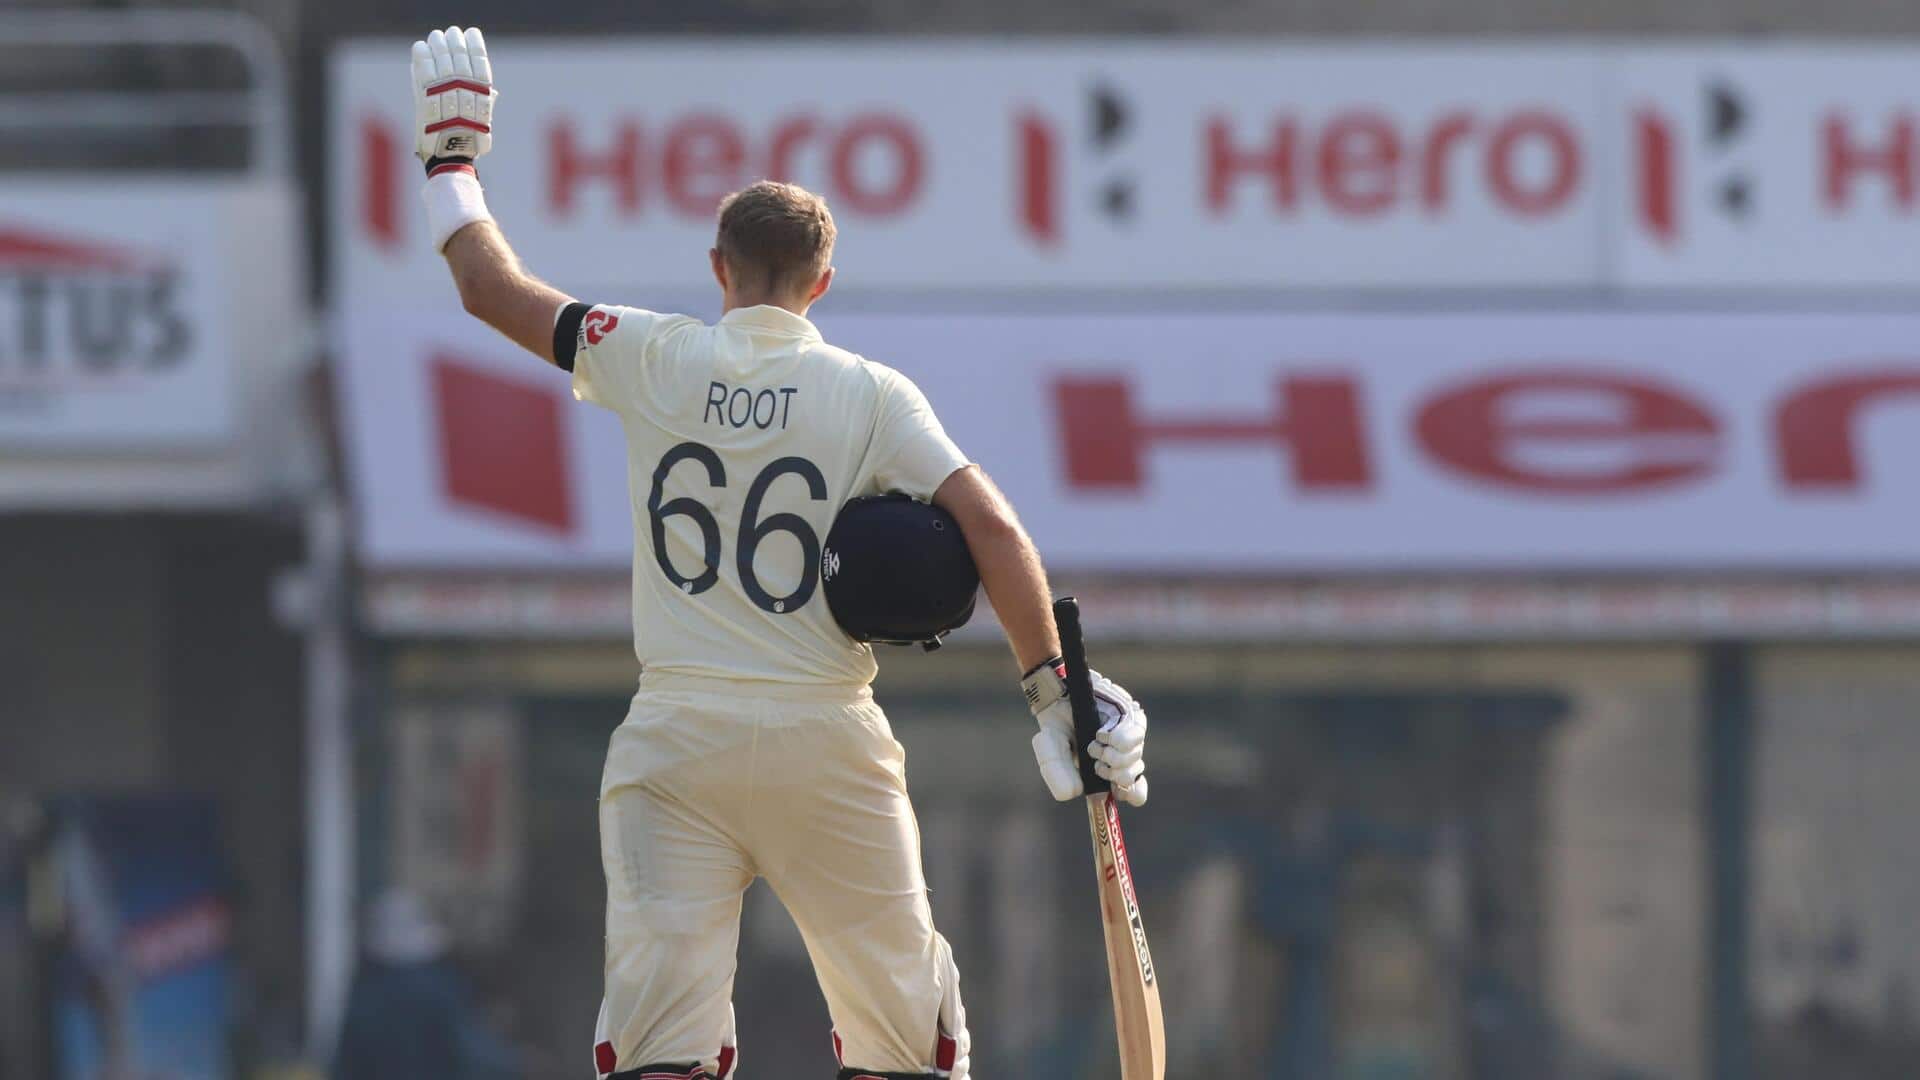 Joe Root breaks Ricky Ponting's Test record against India: Details